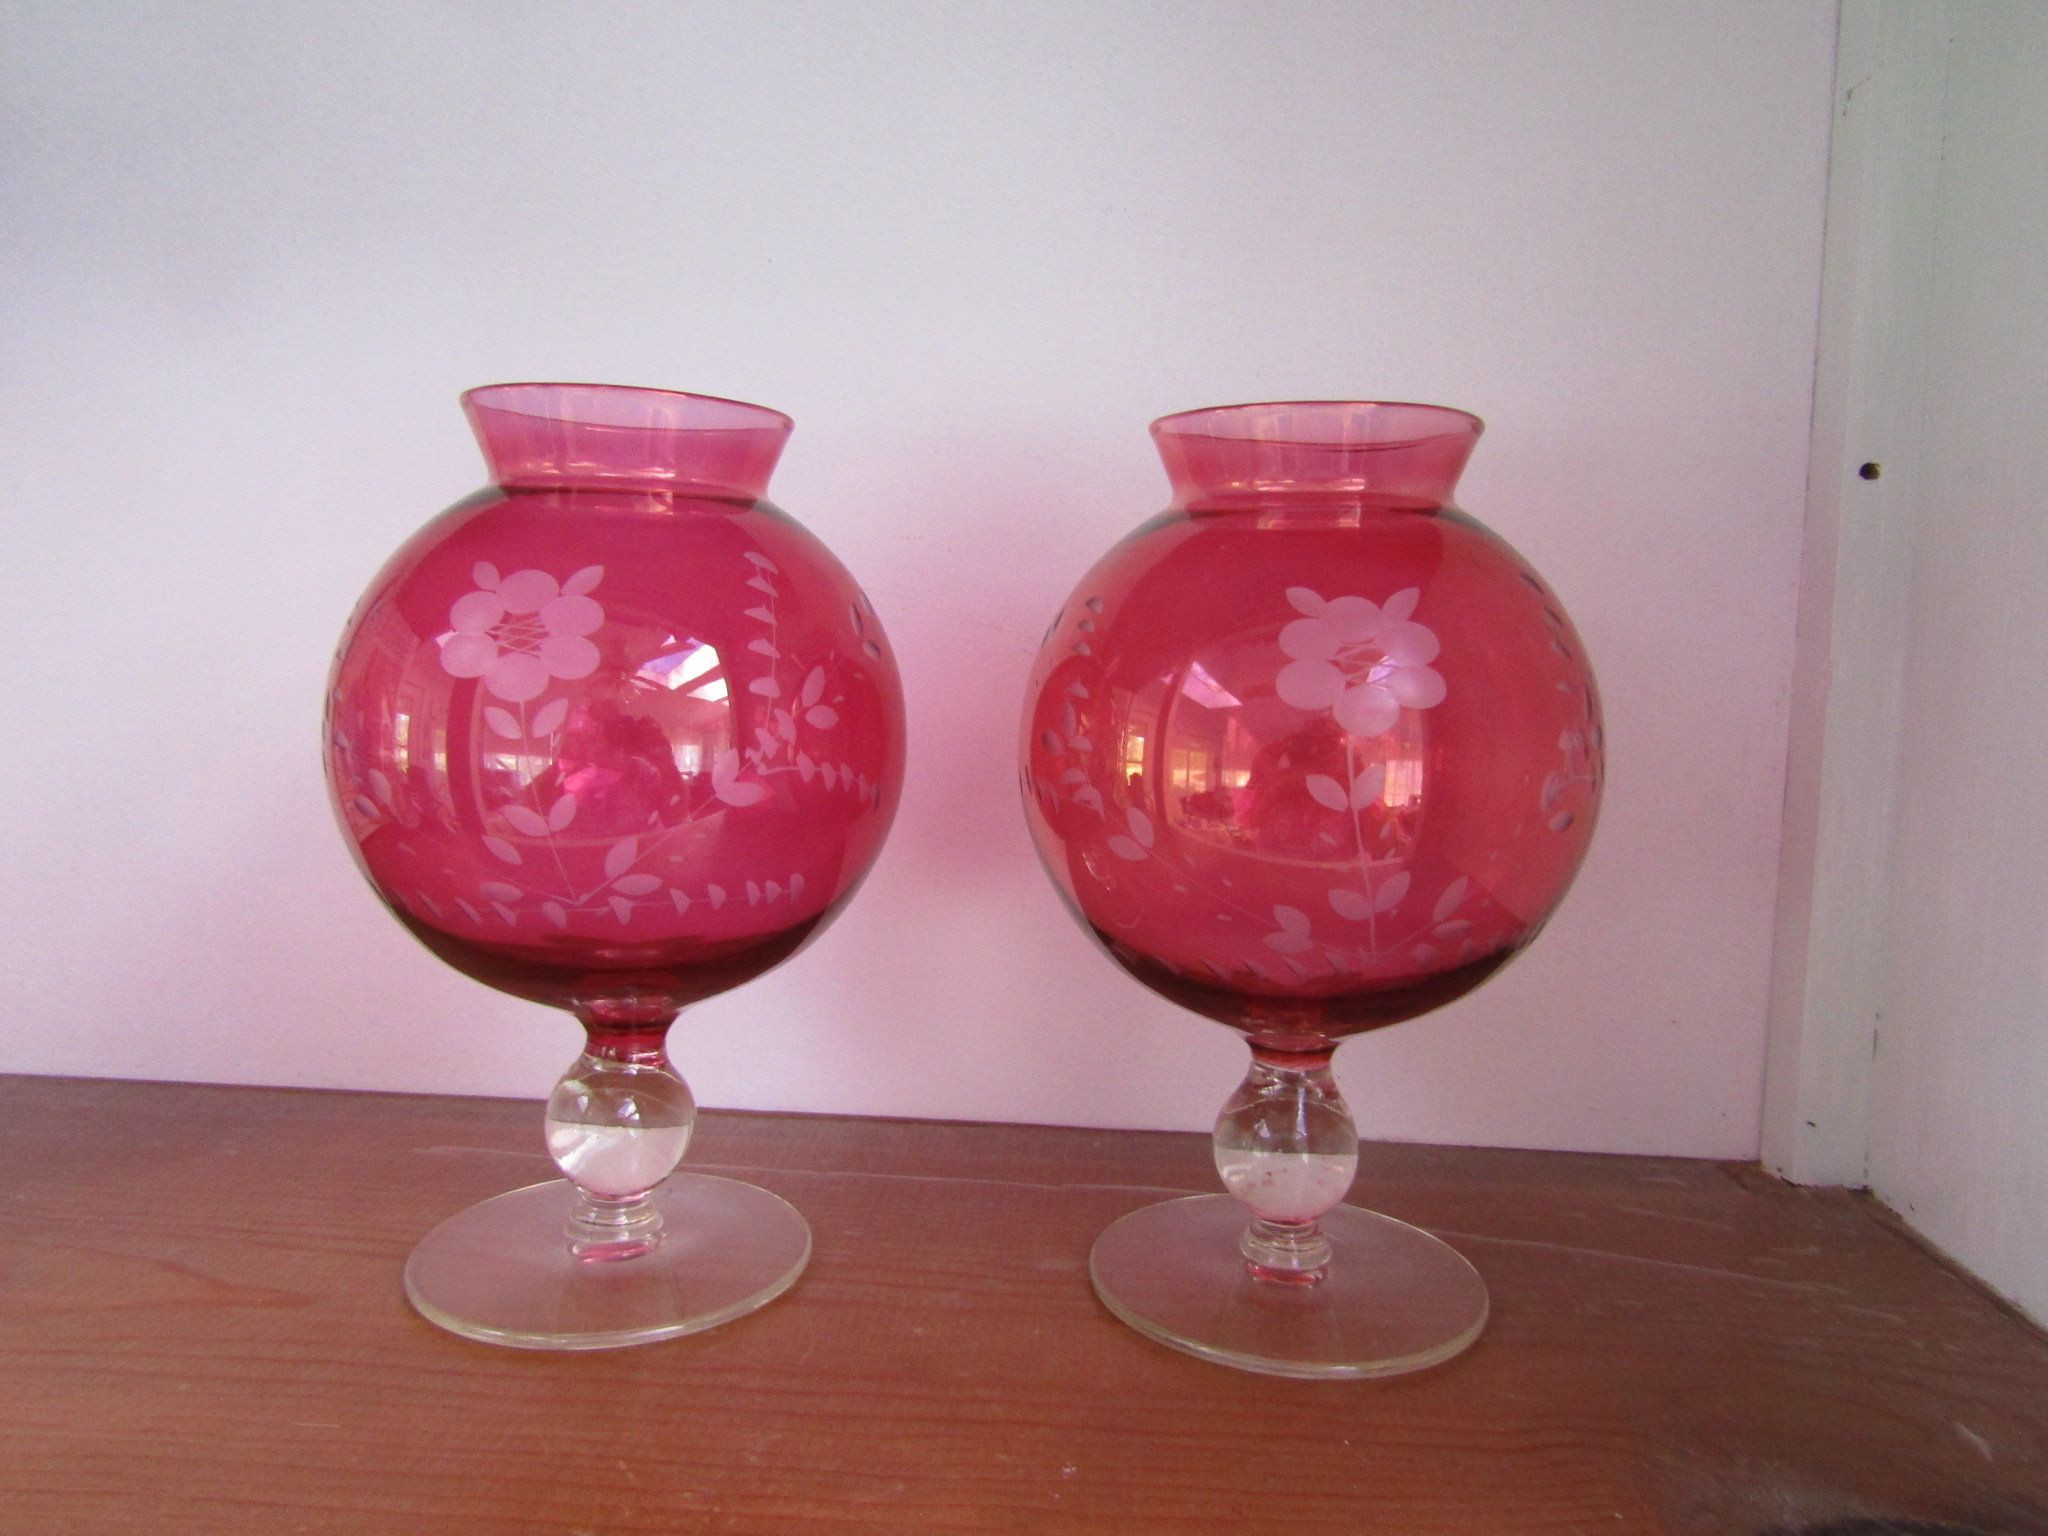 19 Unique Large Glass Ball Vase 2022 free download large glass ball vase of hello fall sale cranberry etched glass ball vases set of 2 floral pertaining to cranberry etched glass ball vases set of 2 floral etching vintage items